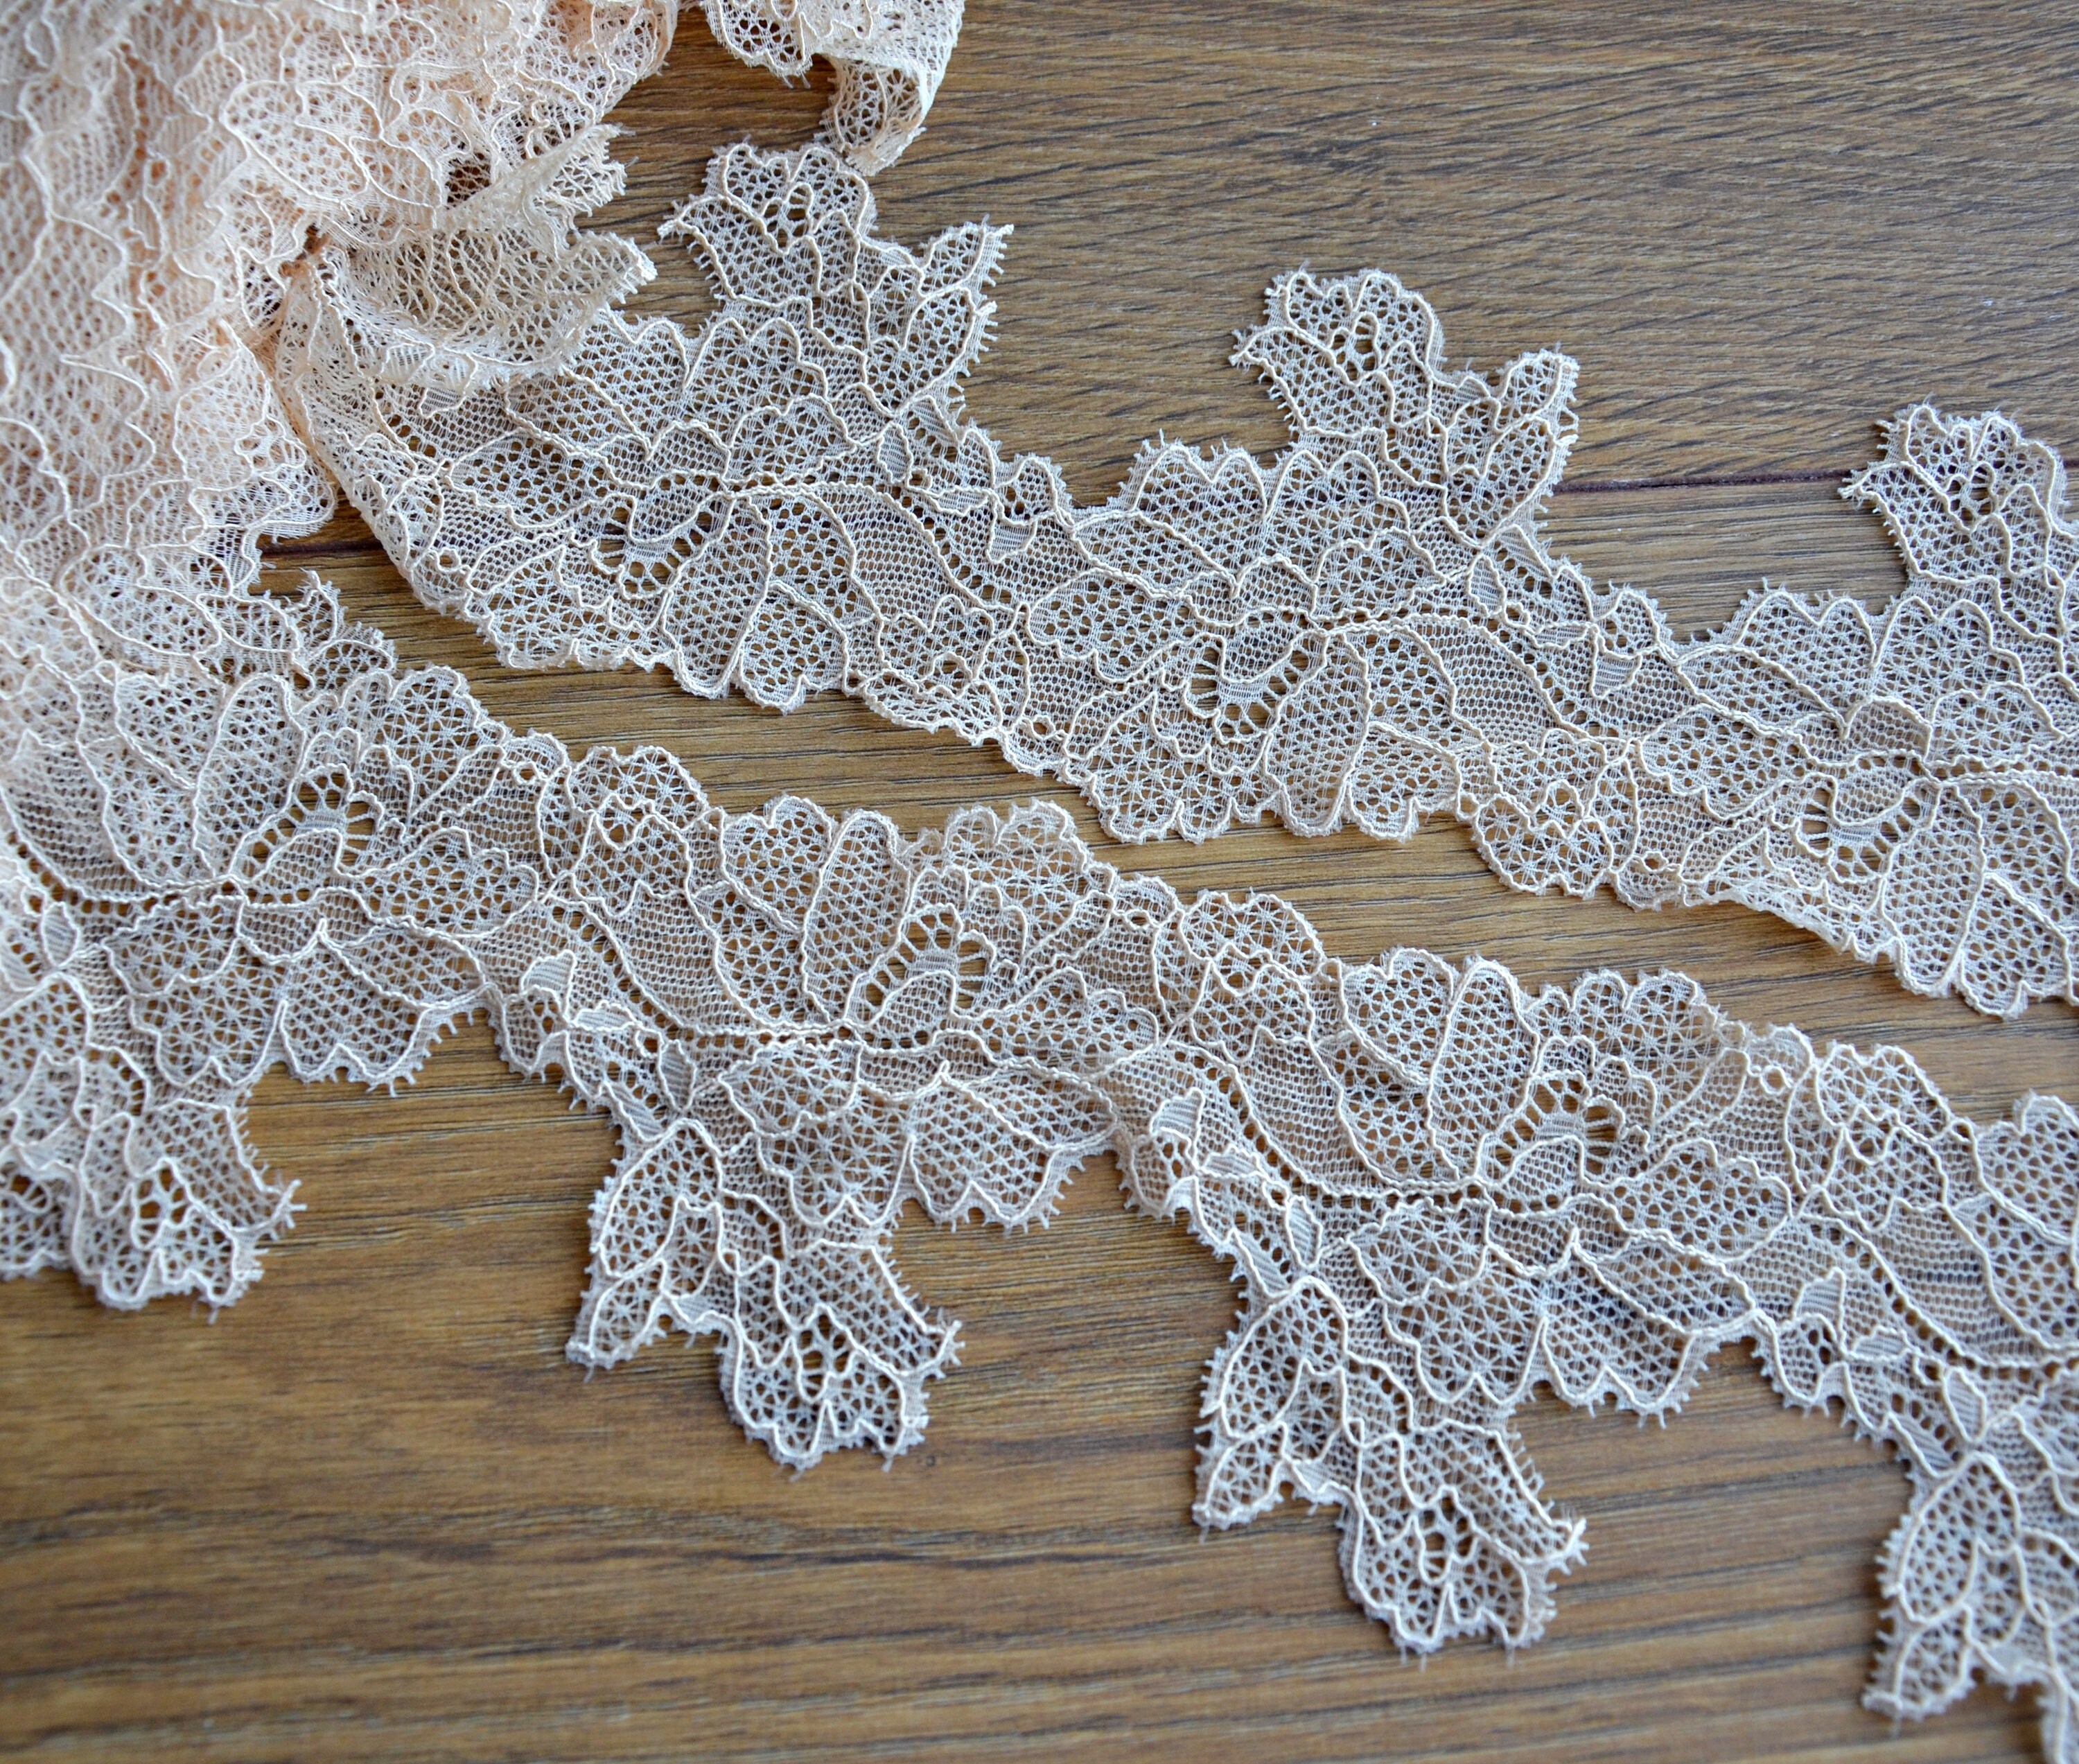 2.18 Yards Beige Stretch Lace Trim Scalloped Edge Lace | Etsy